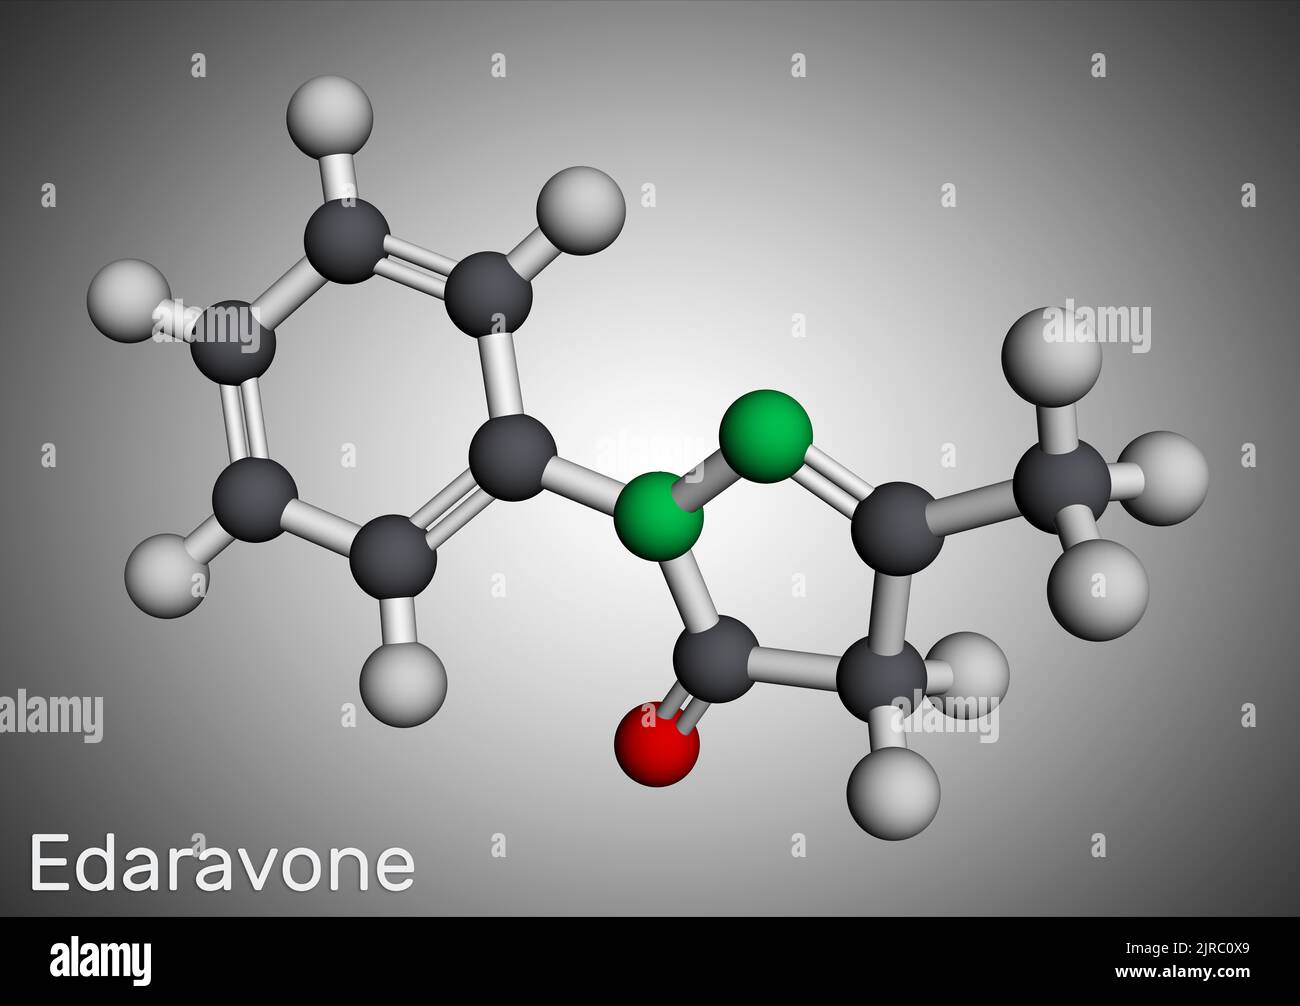 Edaravone molecule. It is used for treatment of amyotrophic lateral sclerosis ALS. Molecular model. 3D rendering. Illustration Stock Photo